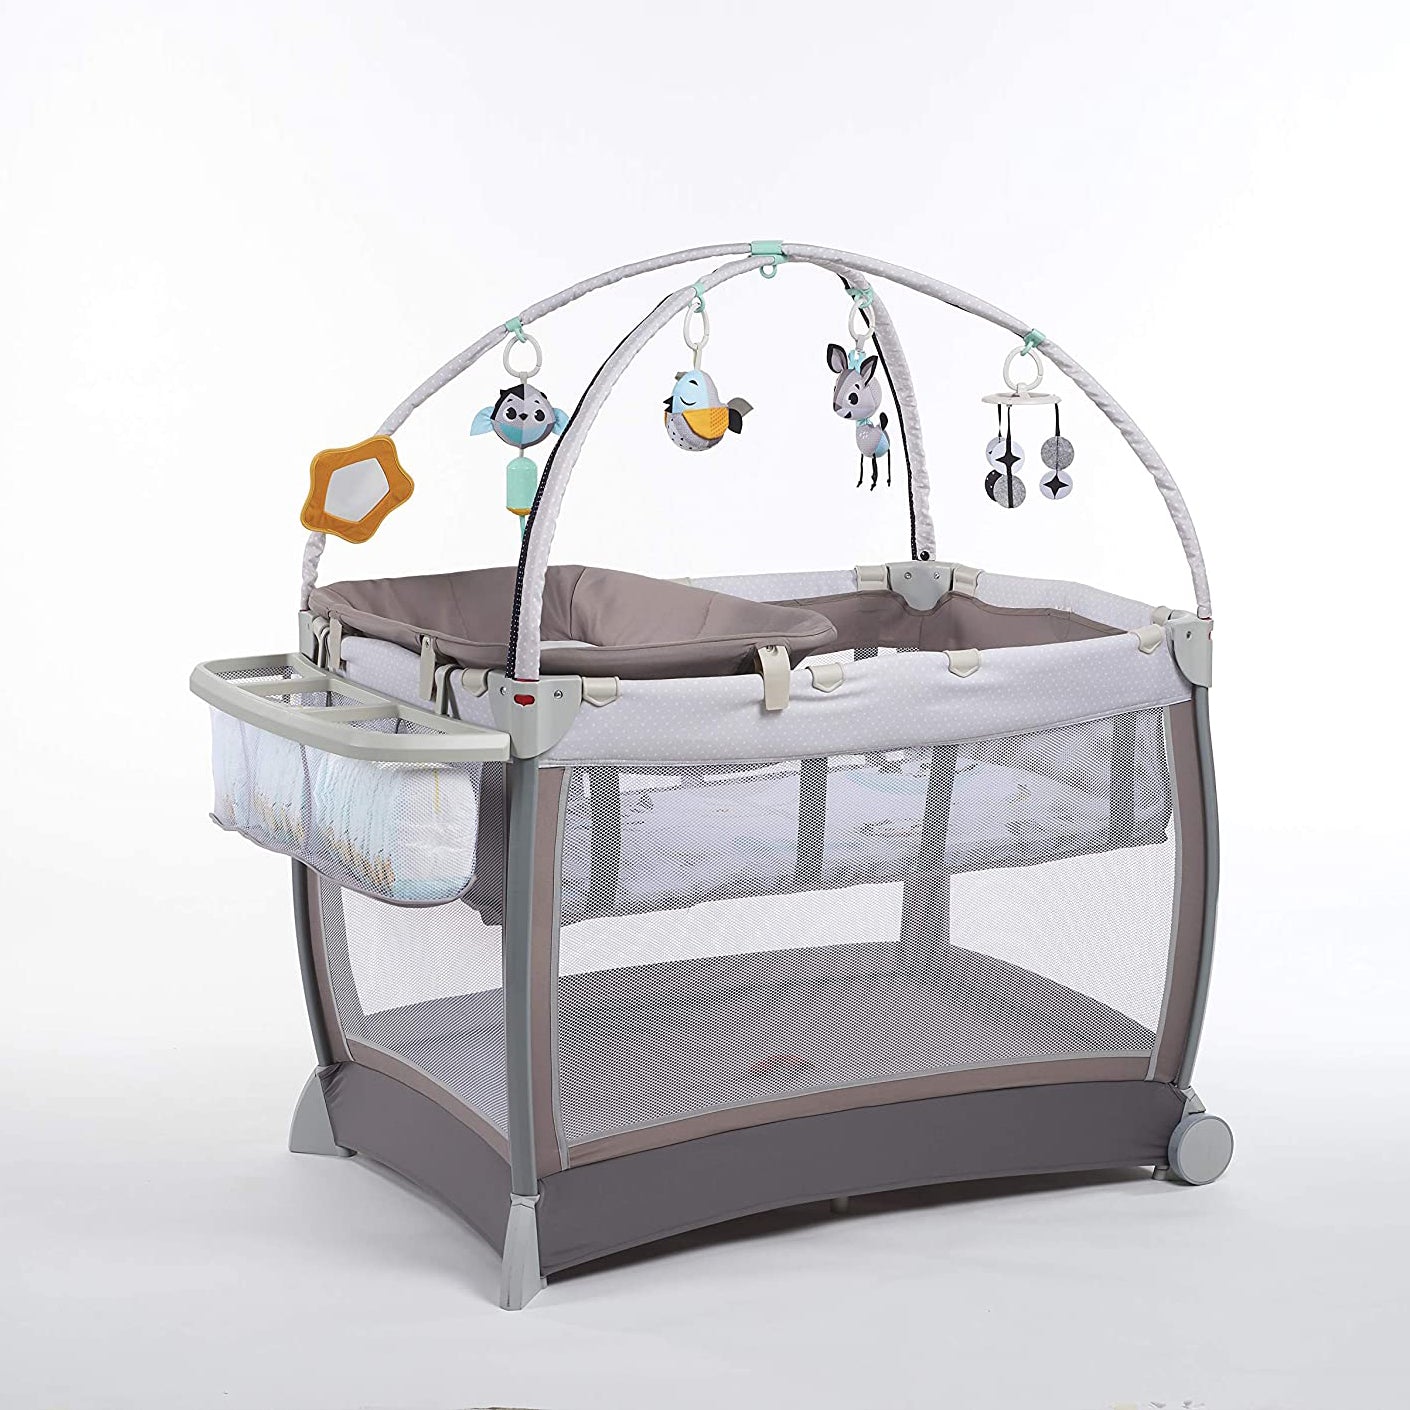 Tiny Love Magical Tales Deluxe 6 in 1 Here I Grow Play Yard - ANB Baby -$100 - $300